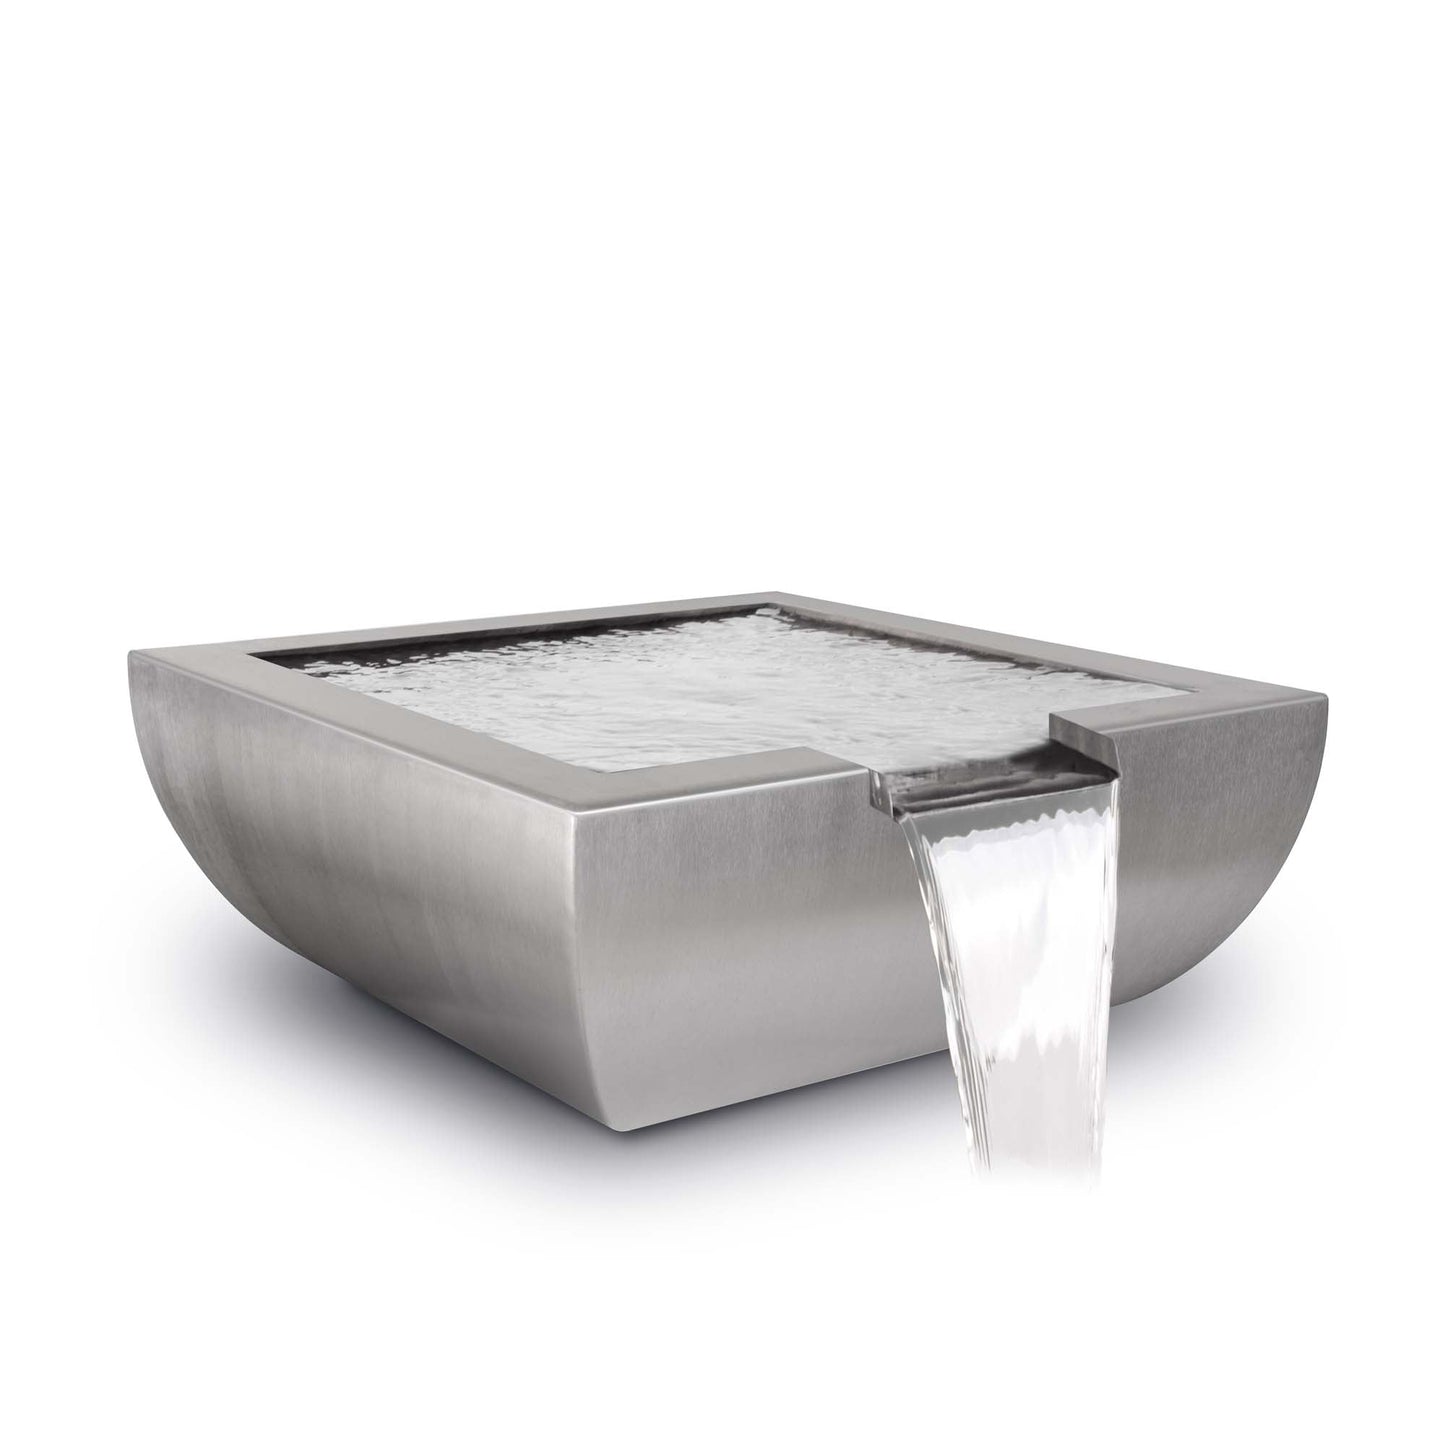 The Outdoor Plus Square Avalon 36" White Powder Coated Water Bowl